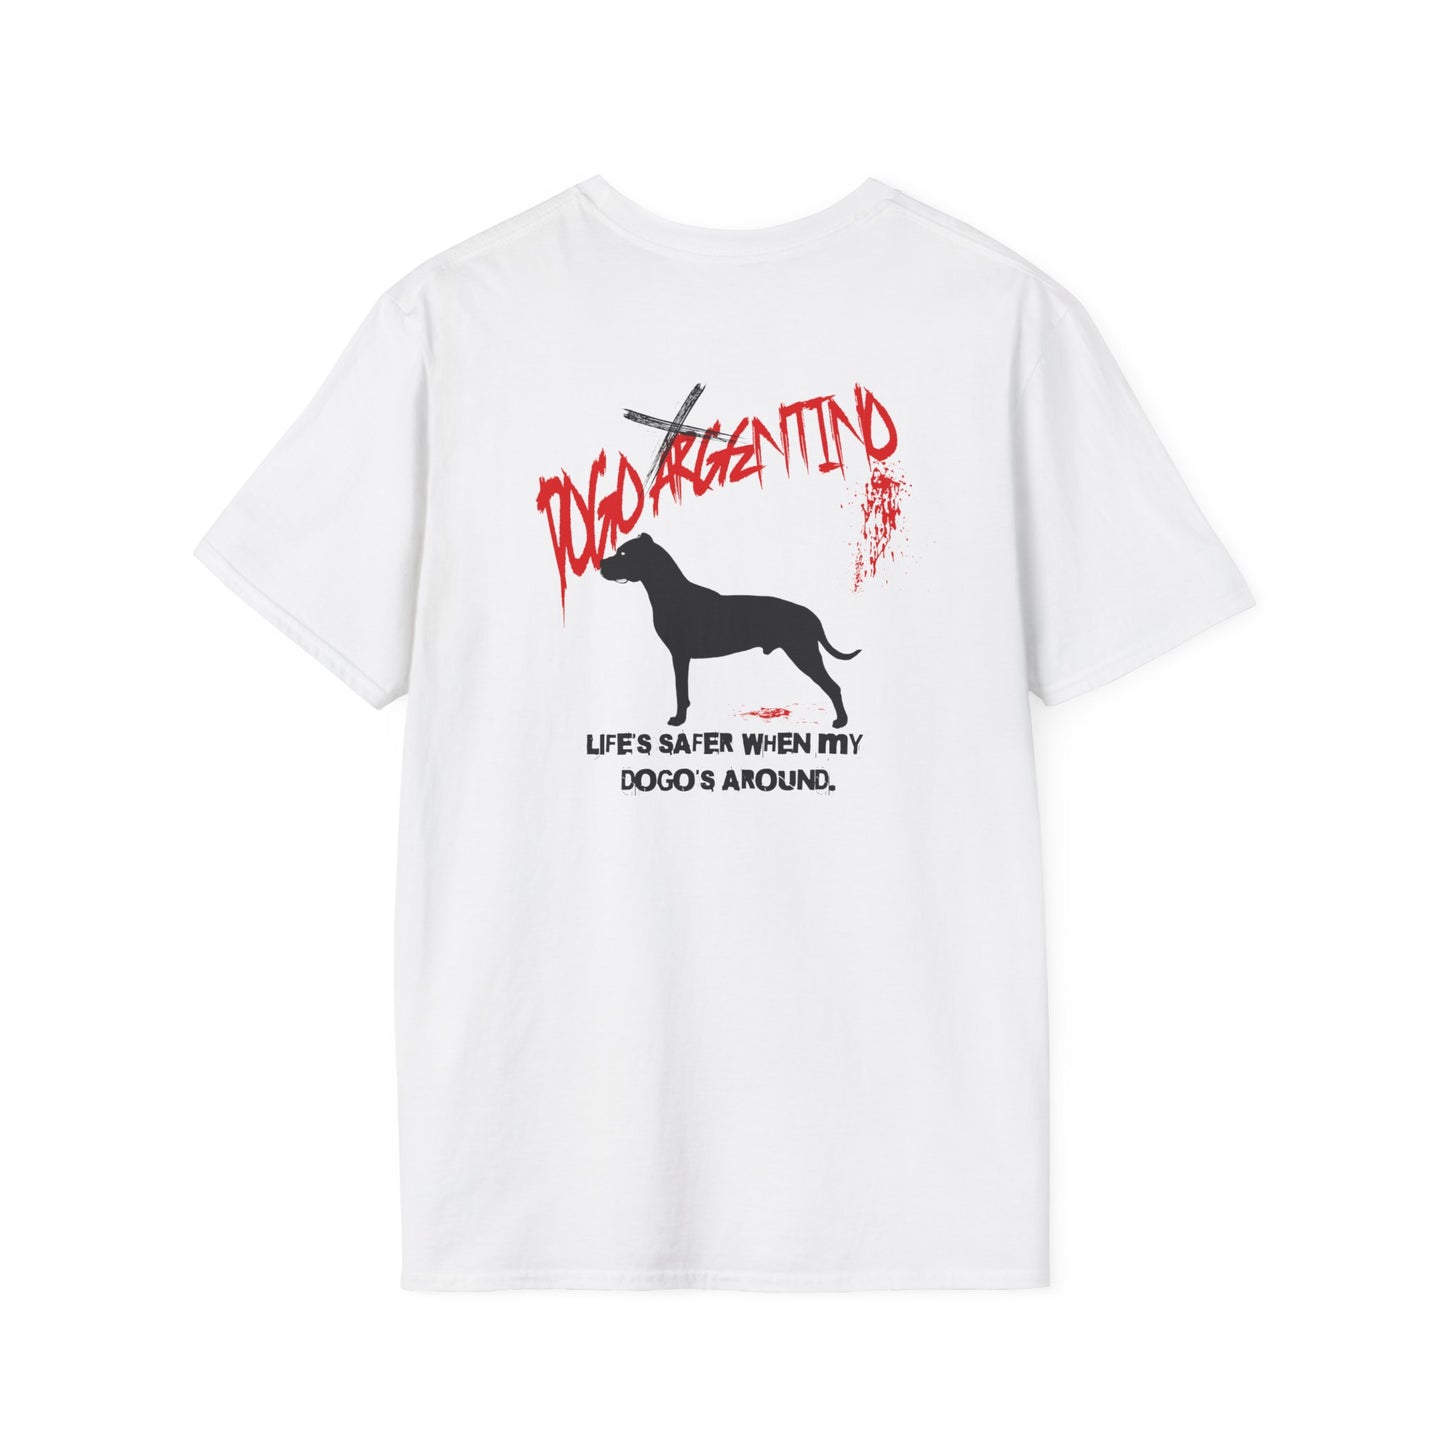 Lifes Safer When My Dogos Around T-Shirt